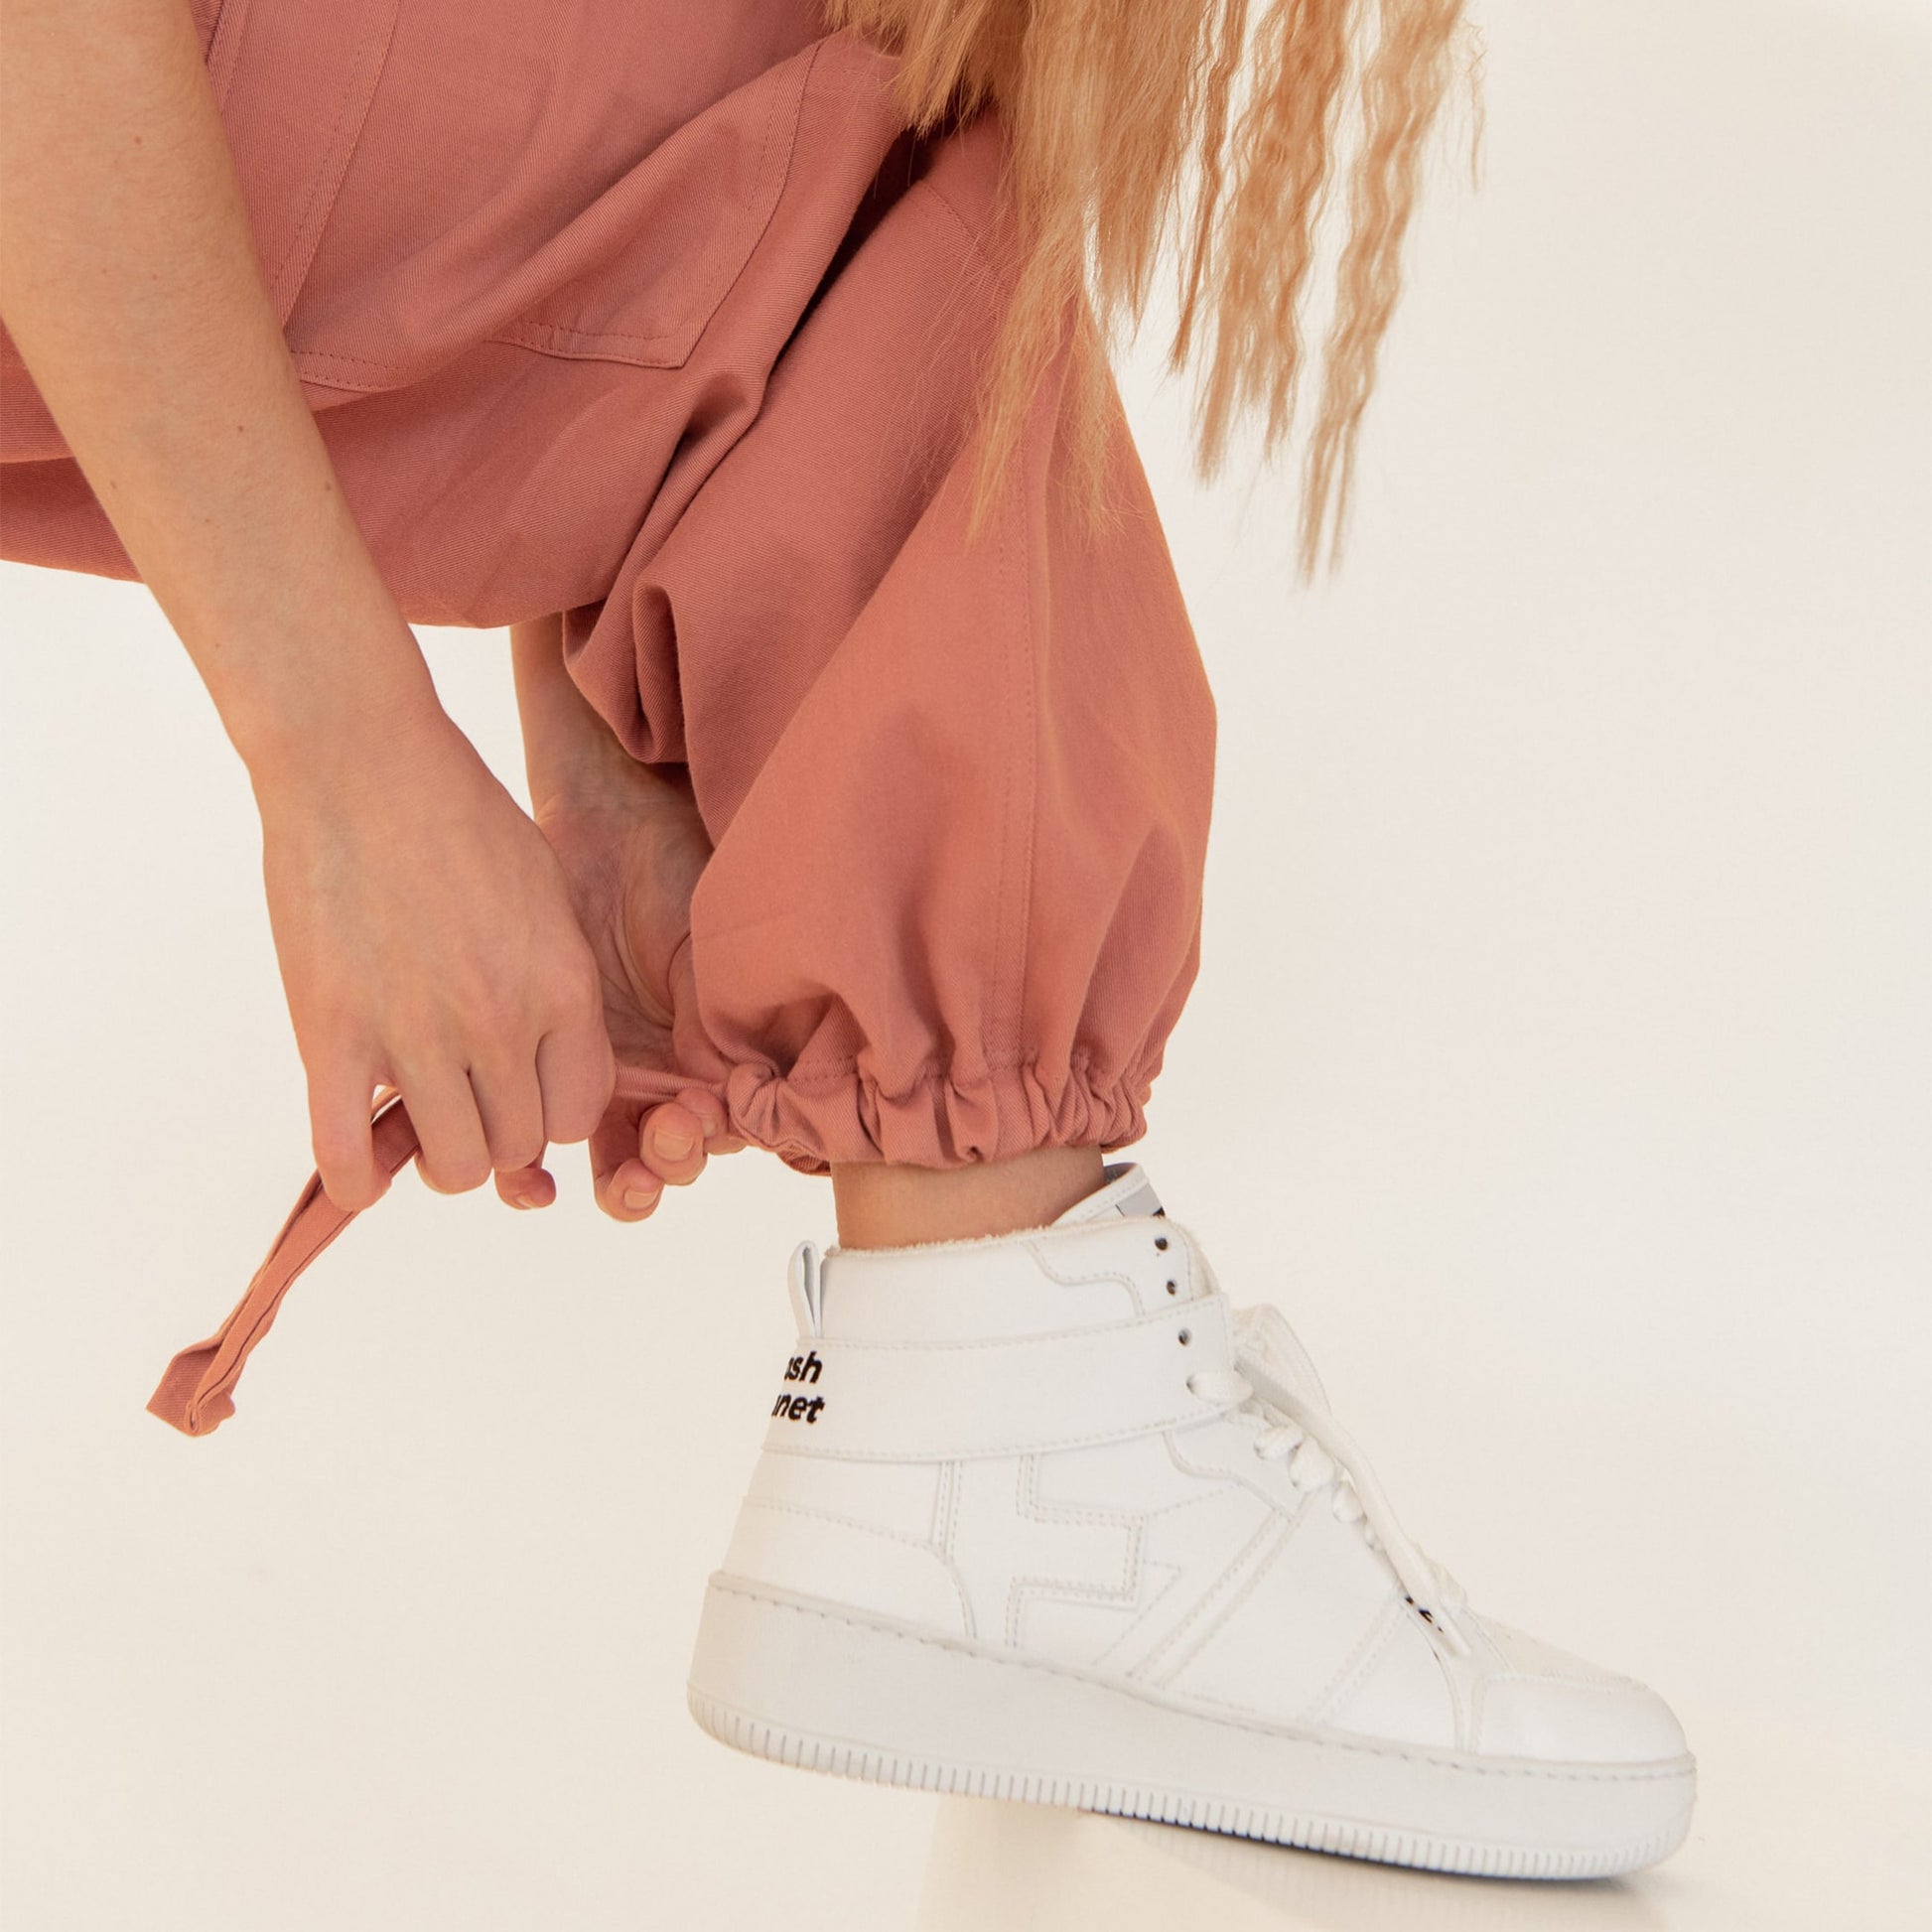 A woman kneels down to tie up a lace at the back of her streetwear style coral tracksuit to tighten it and is wearing Trash Planet's Aster 721 all-white vegan high-top sneakers.